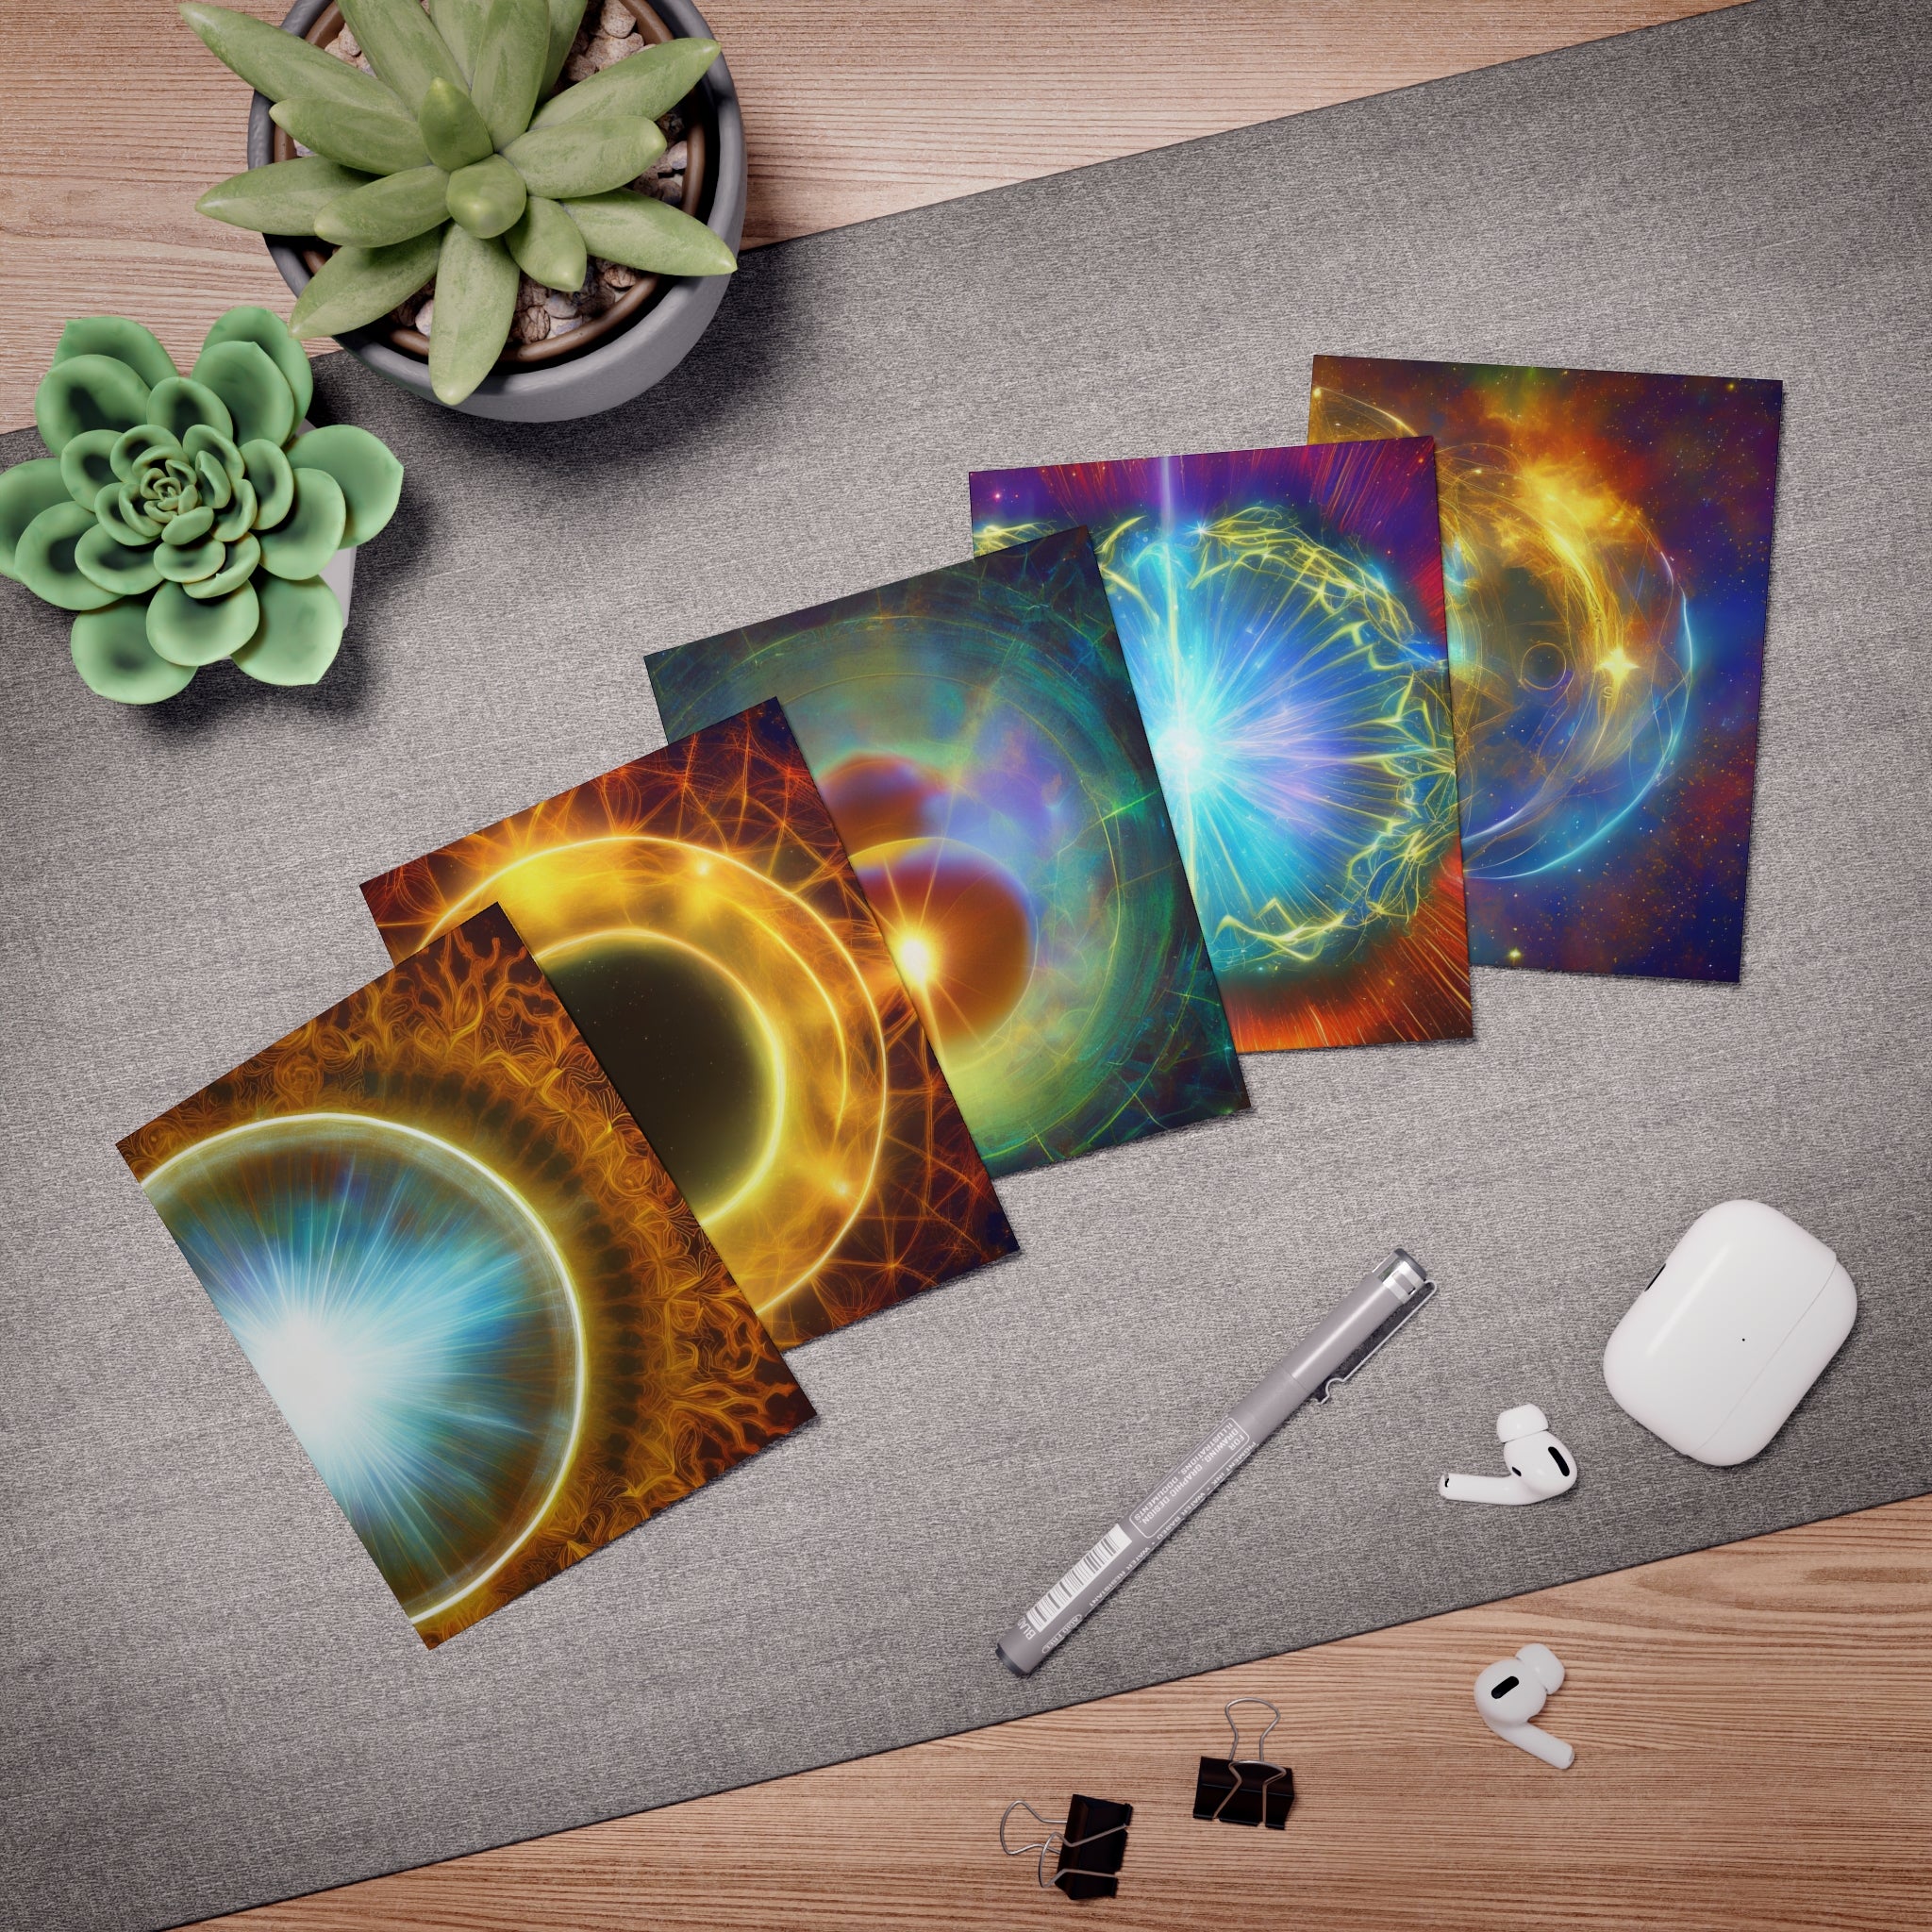 Multi-Design Greeting Cards (5-Pack)Heavenly message, Portal to Ascension